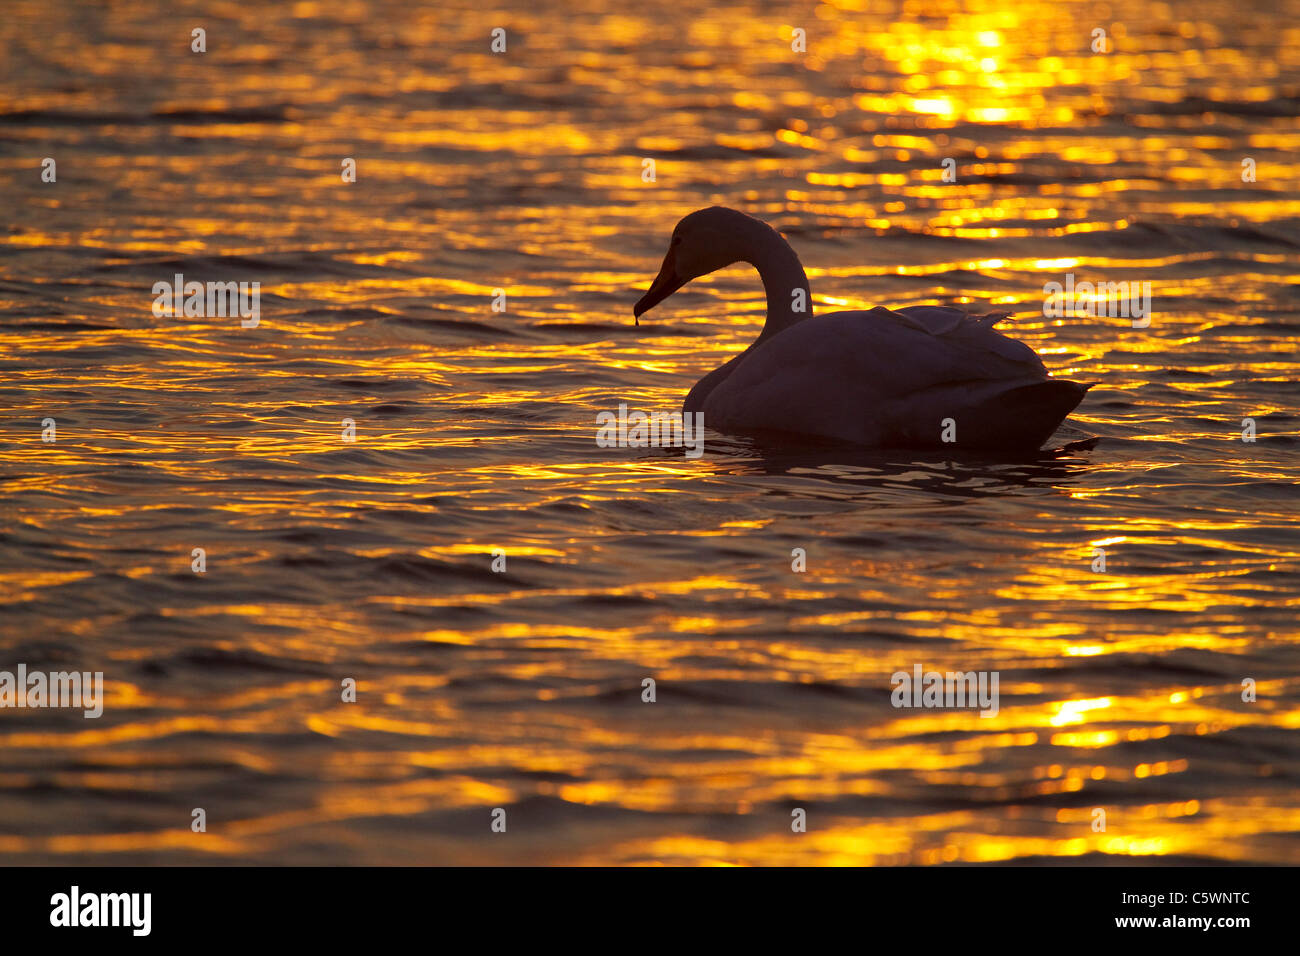 Whooper Swan (Cygnus cygnus), adult silhouetted on lake at sunset, Iceland. Stock Photo